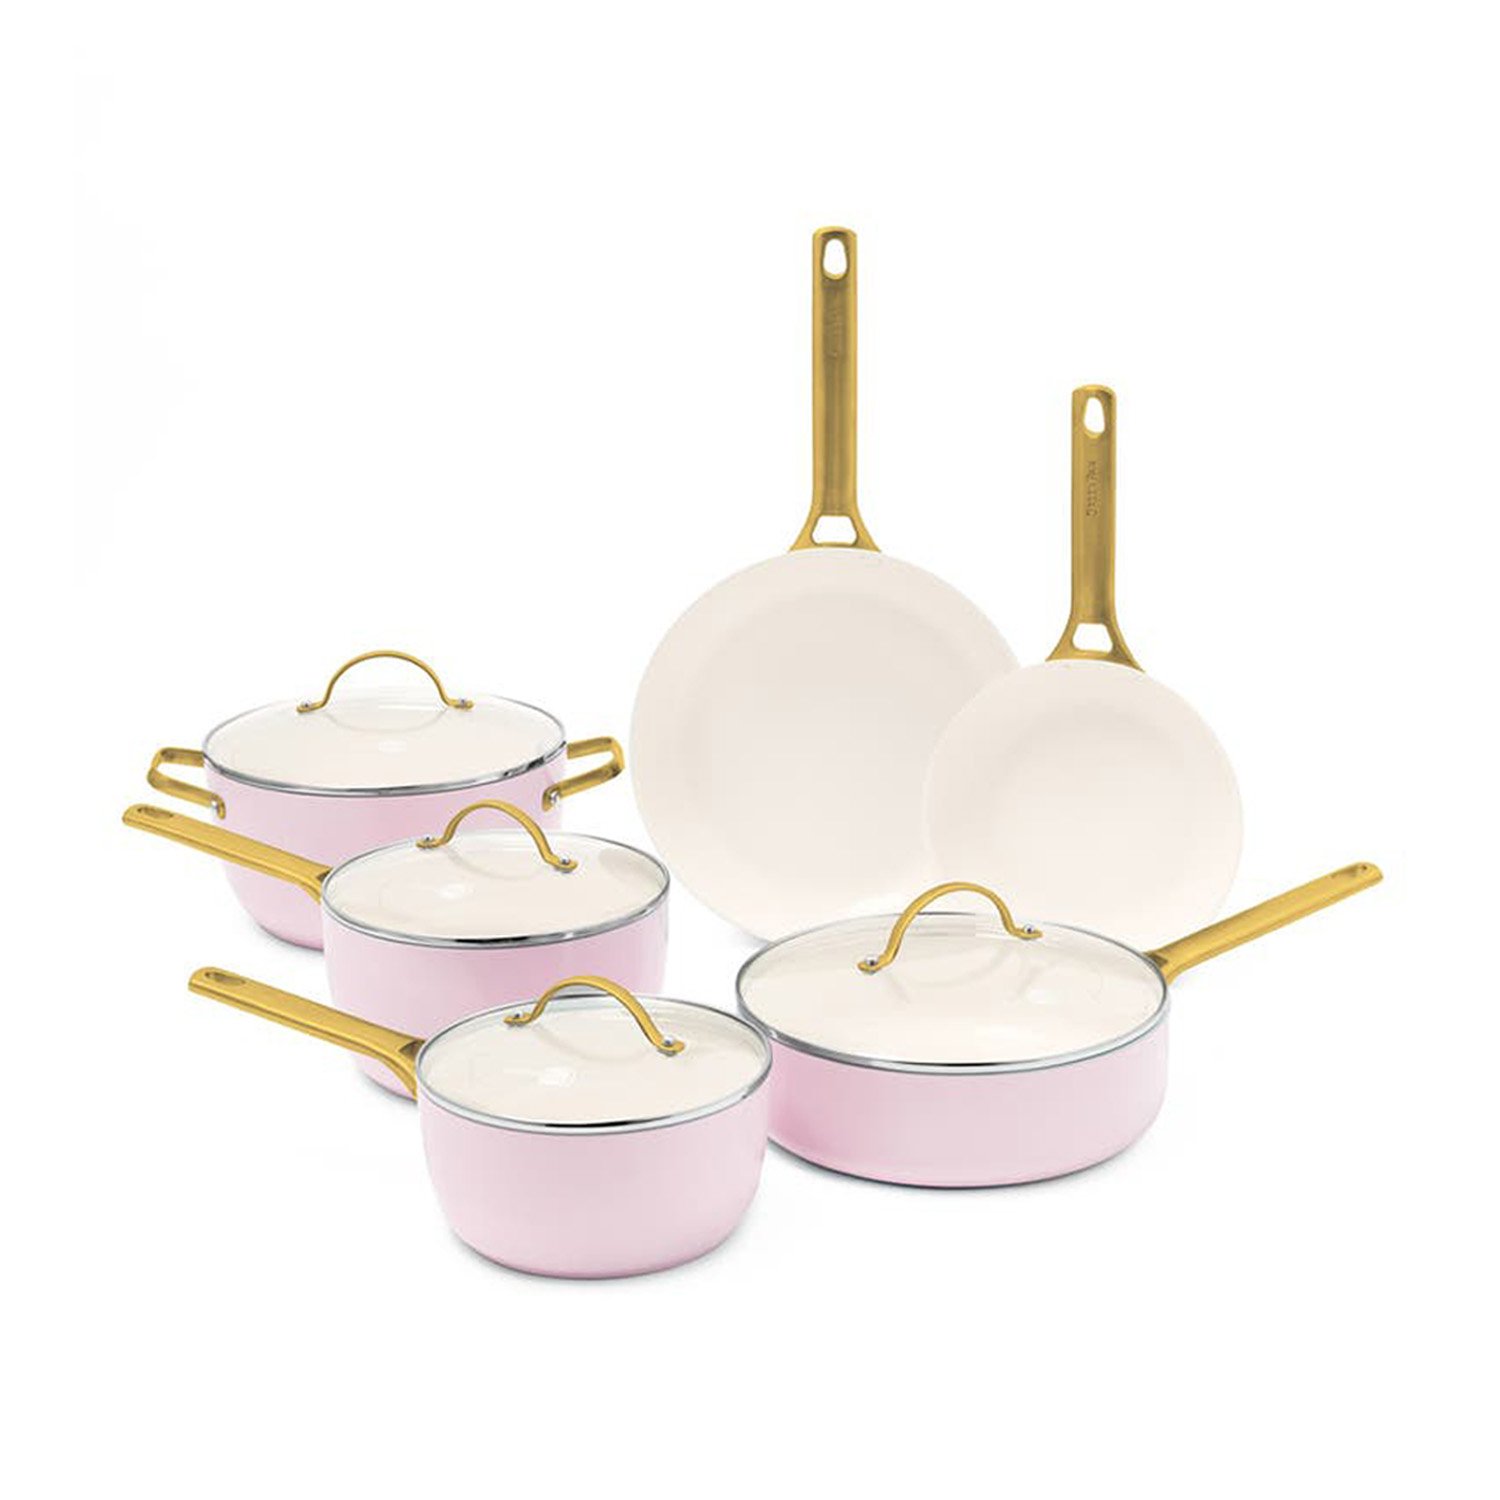 Pretty everyday cookware!